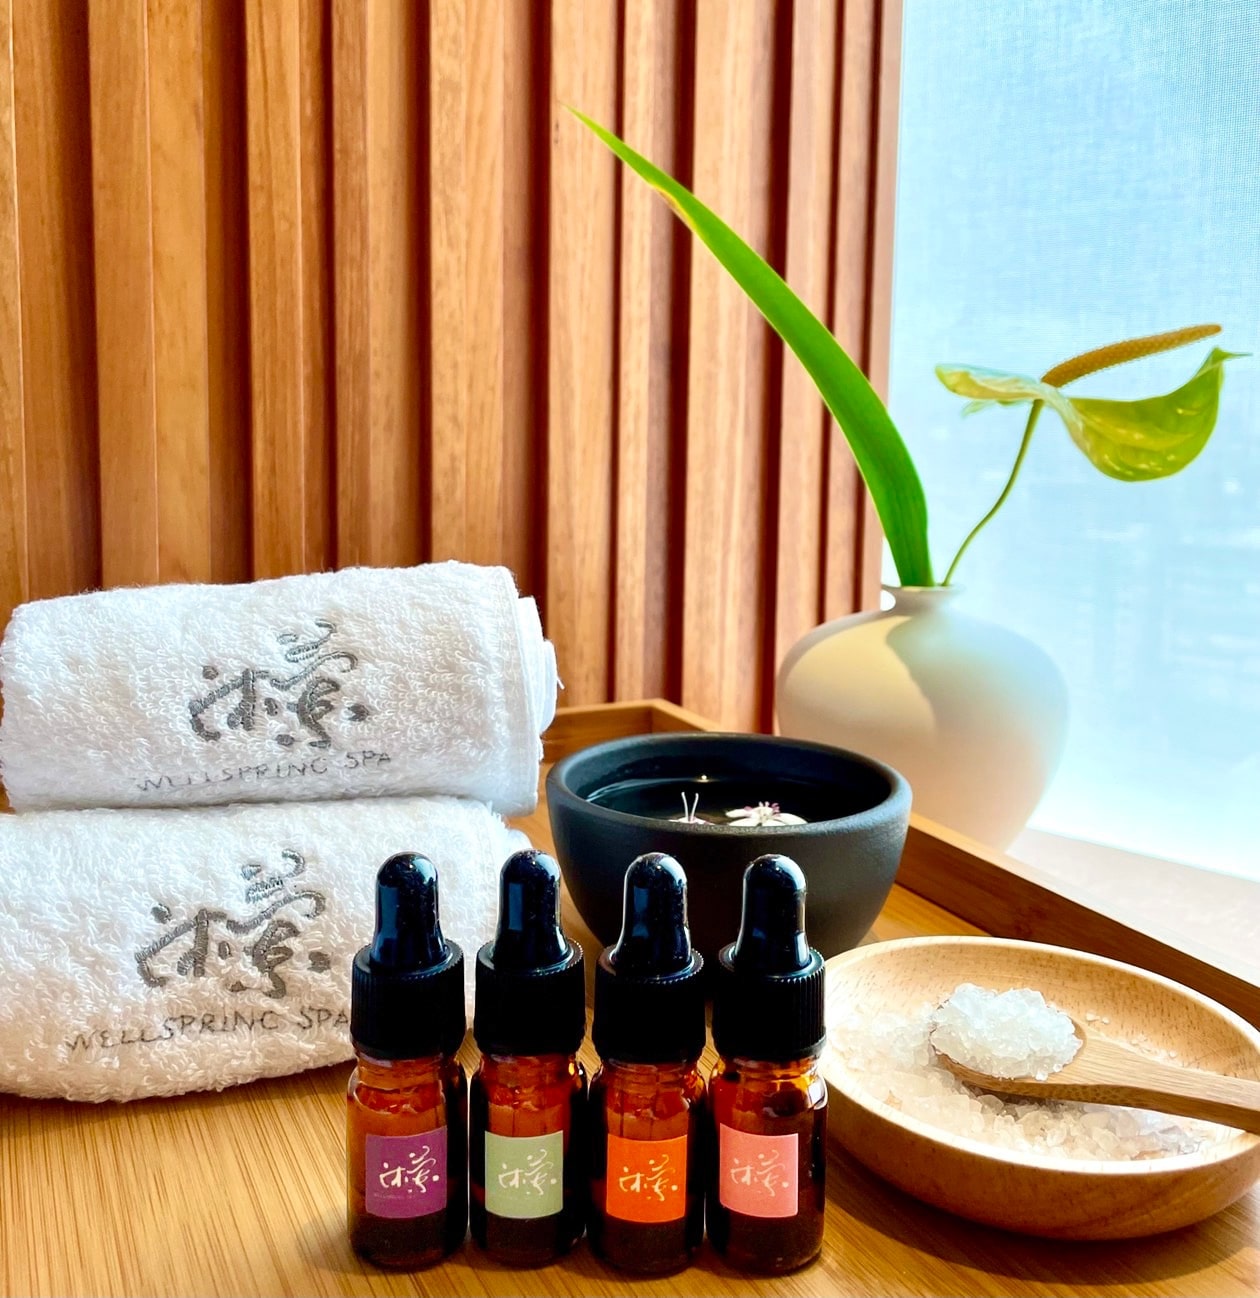 Regent_Guests are provided with complimentary essential oil baths with four options to choose from.jpg 